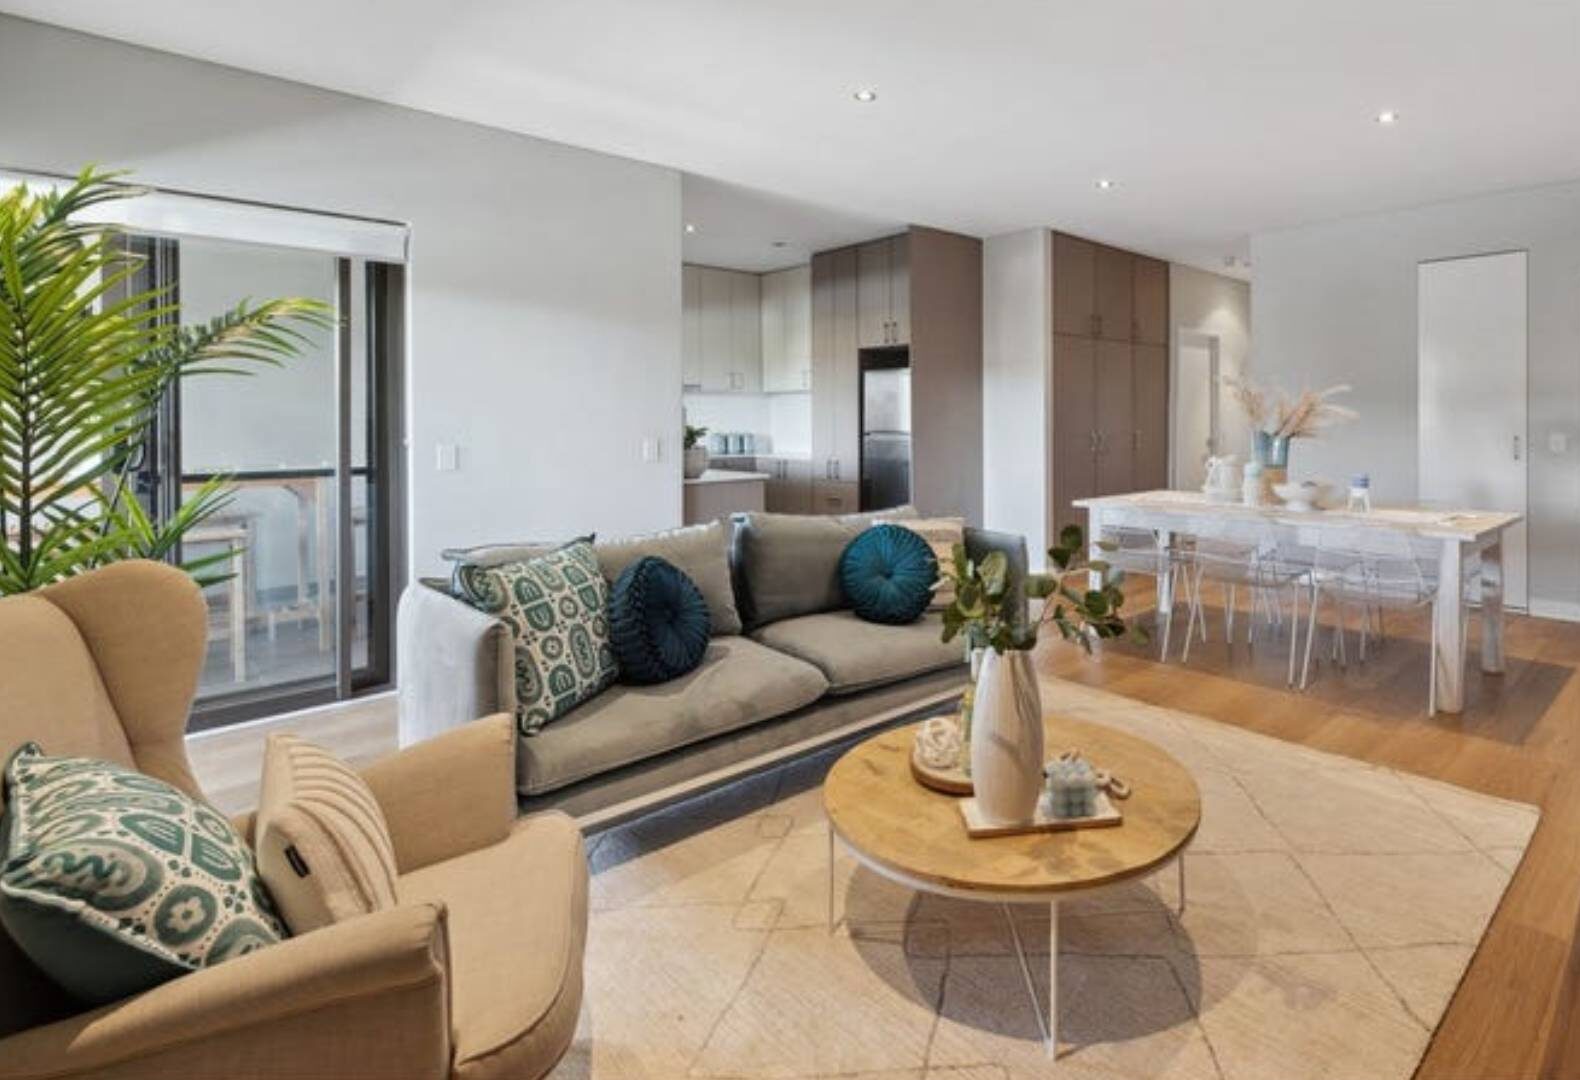 Beautiful Home Staging Perth to appeal to a broad range of buyers